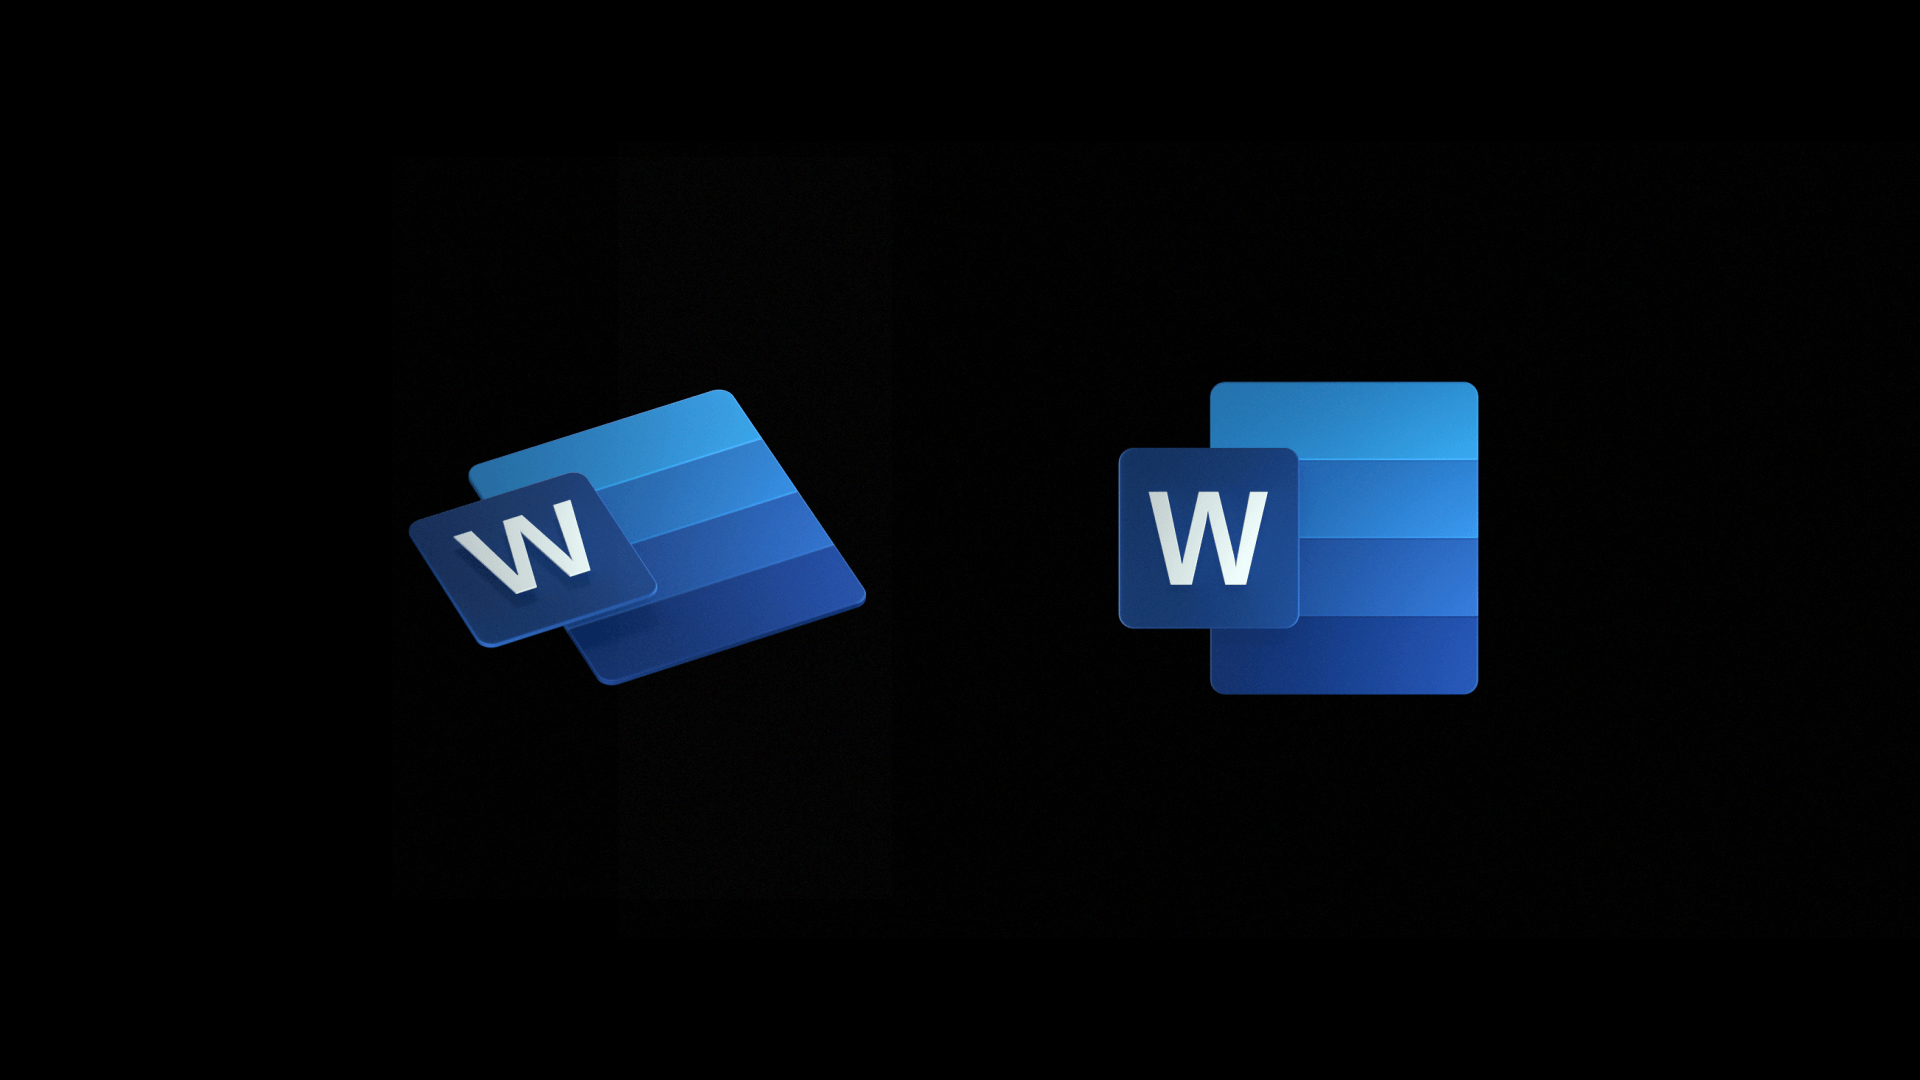 2018 Microsoft Word Logo - Microsoft has unveiled colourful new icons for Office